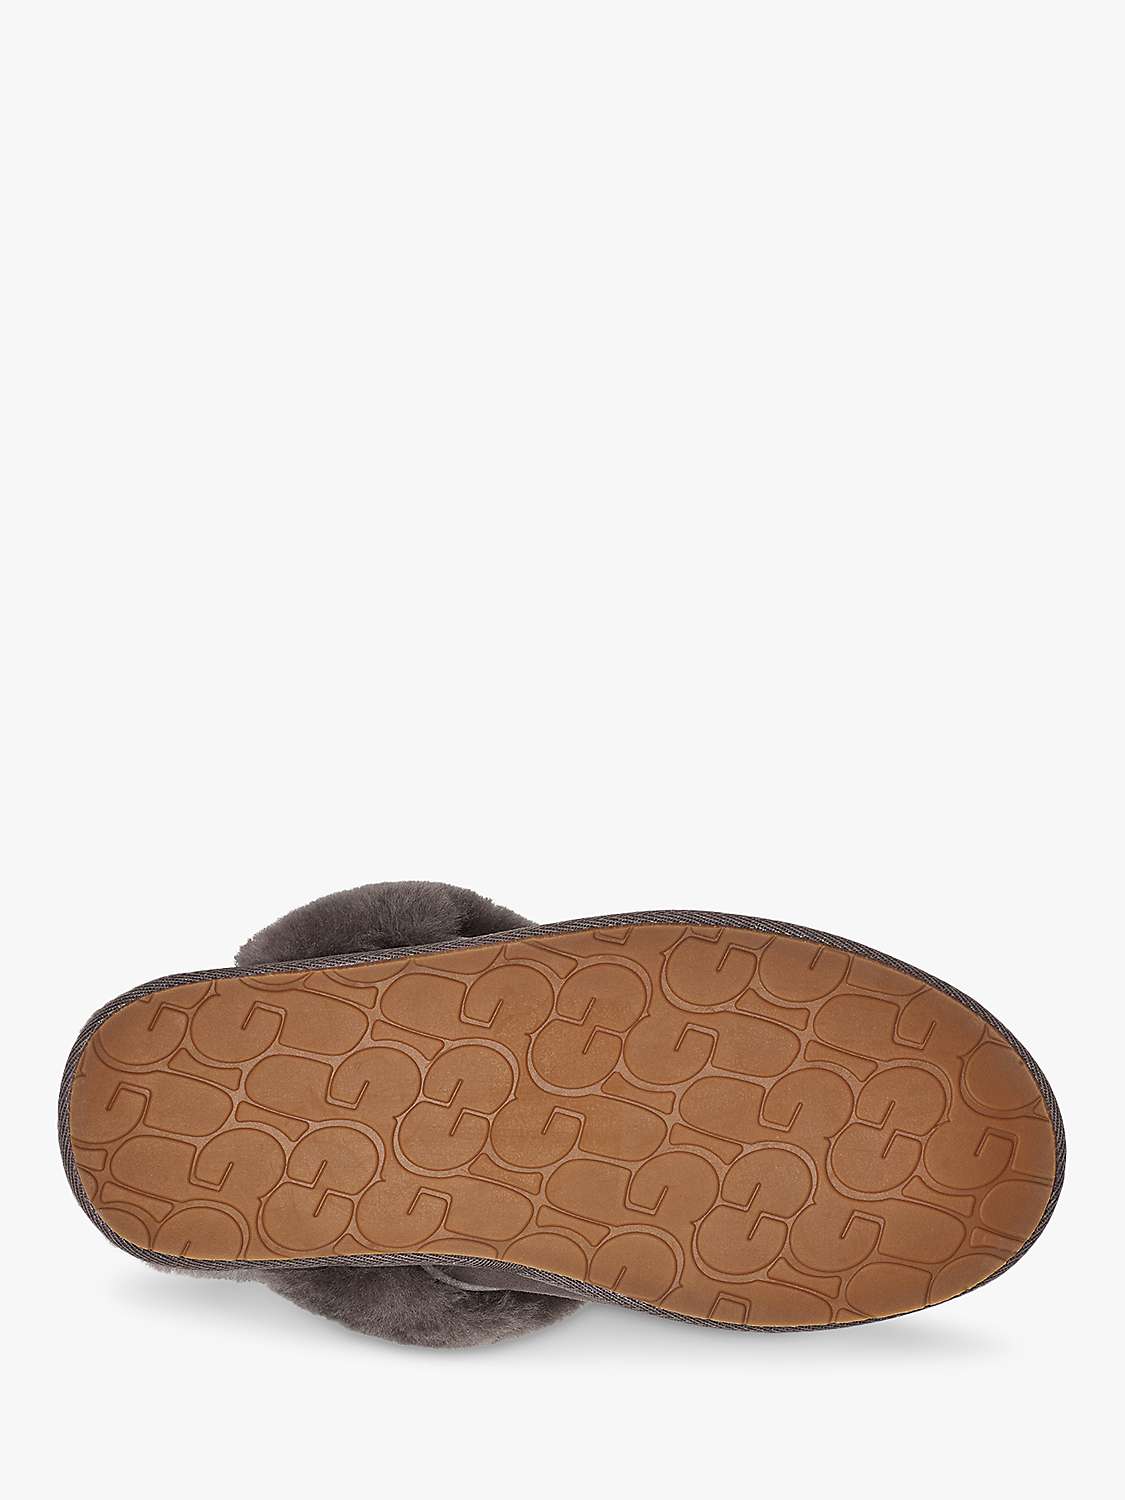 Buy UGG Scuffette Sheepskin and Suede Slippers Online at johnlewis.com